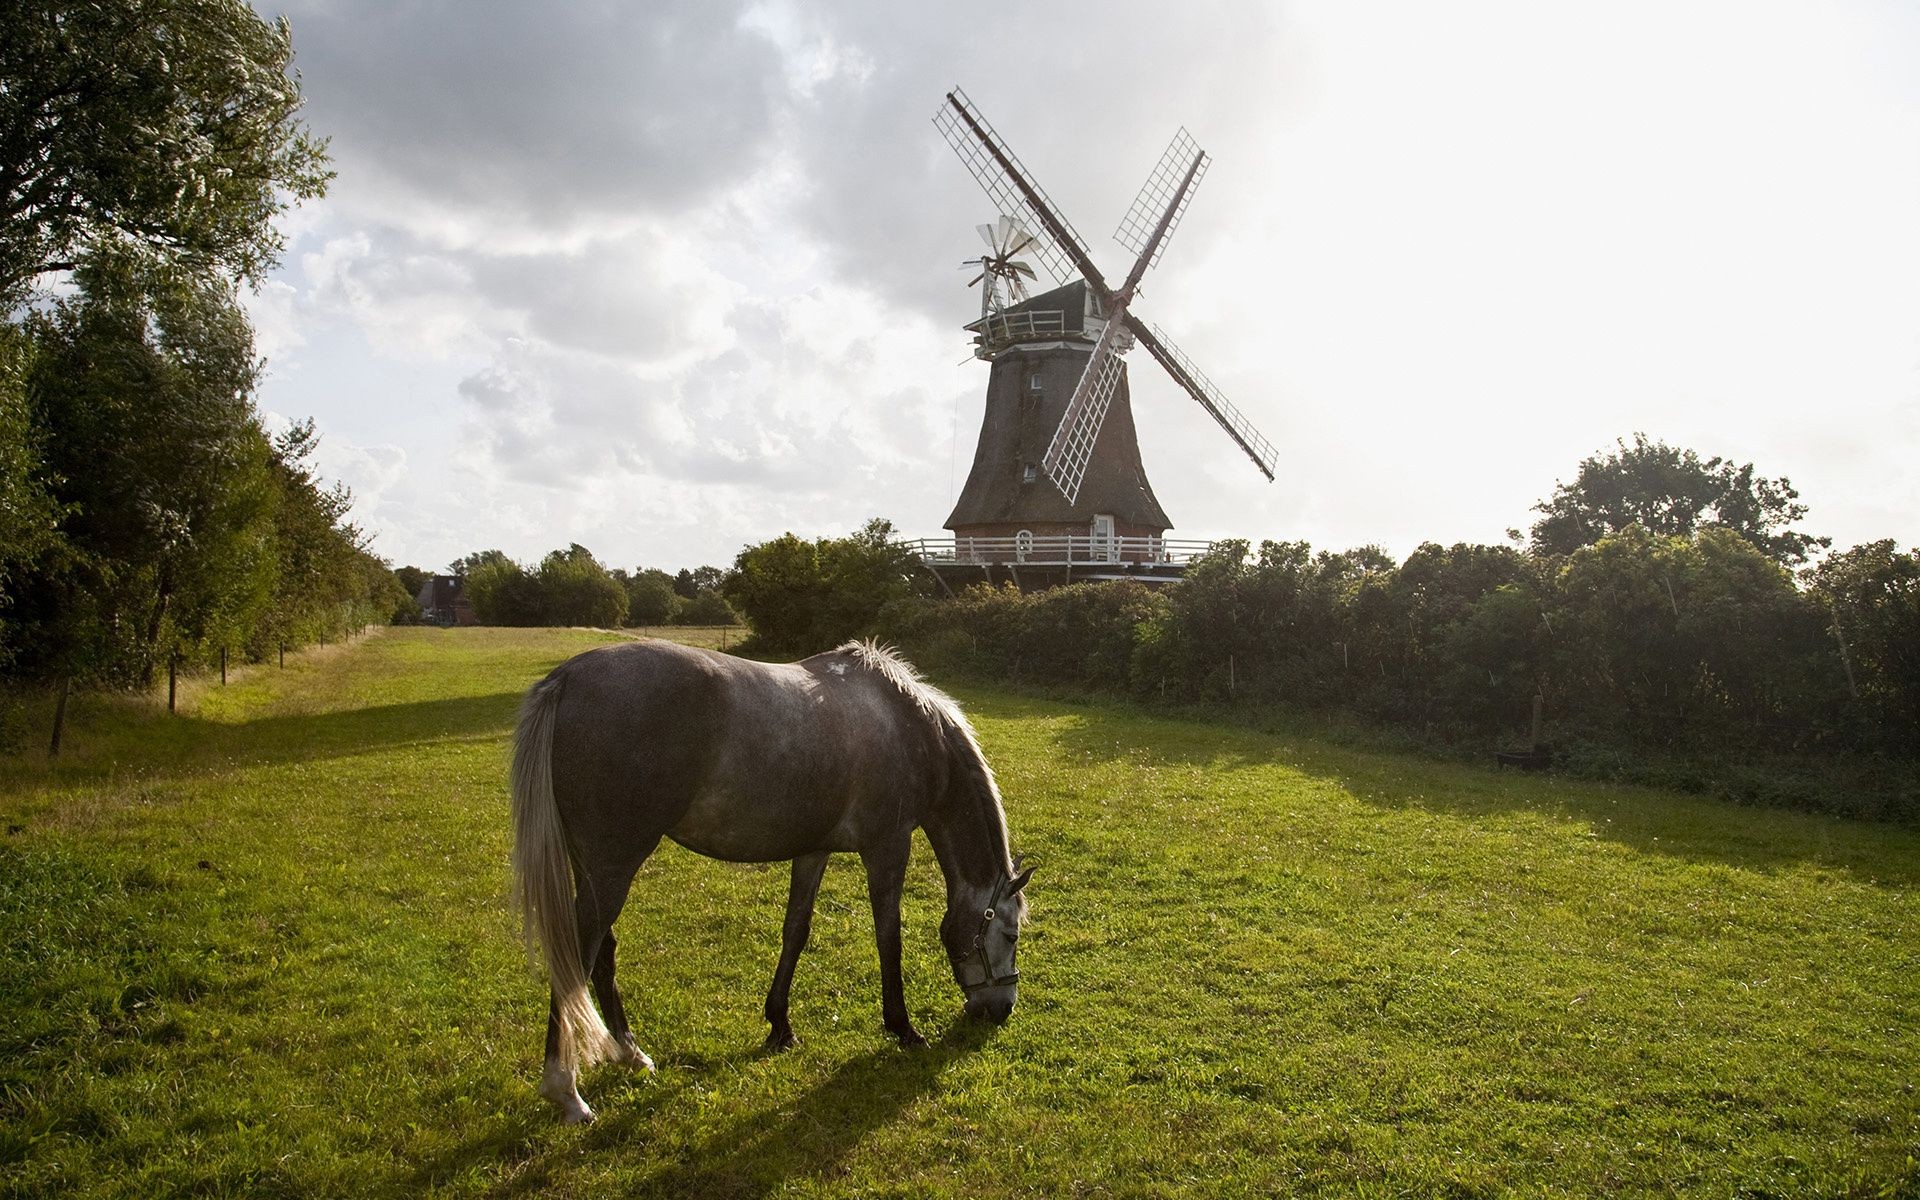 horses farm grass agriculture windmill field landscape hayfield rural outdoors nature countryside pasture cavalry